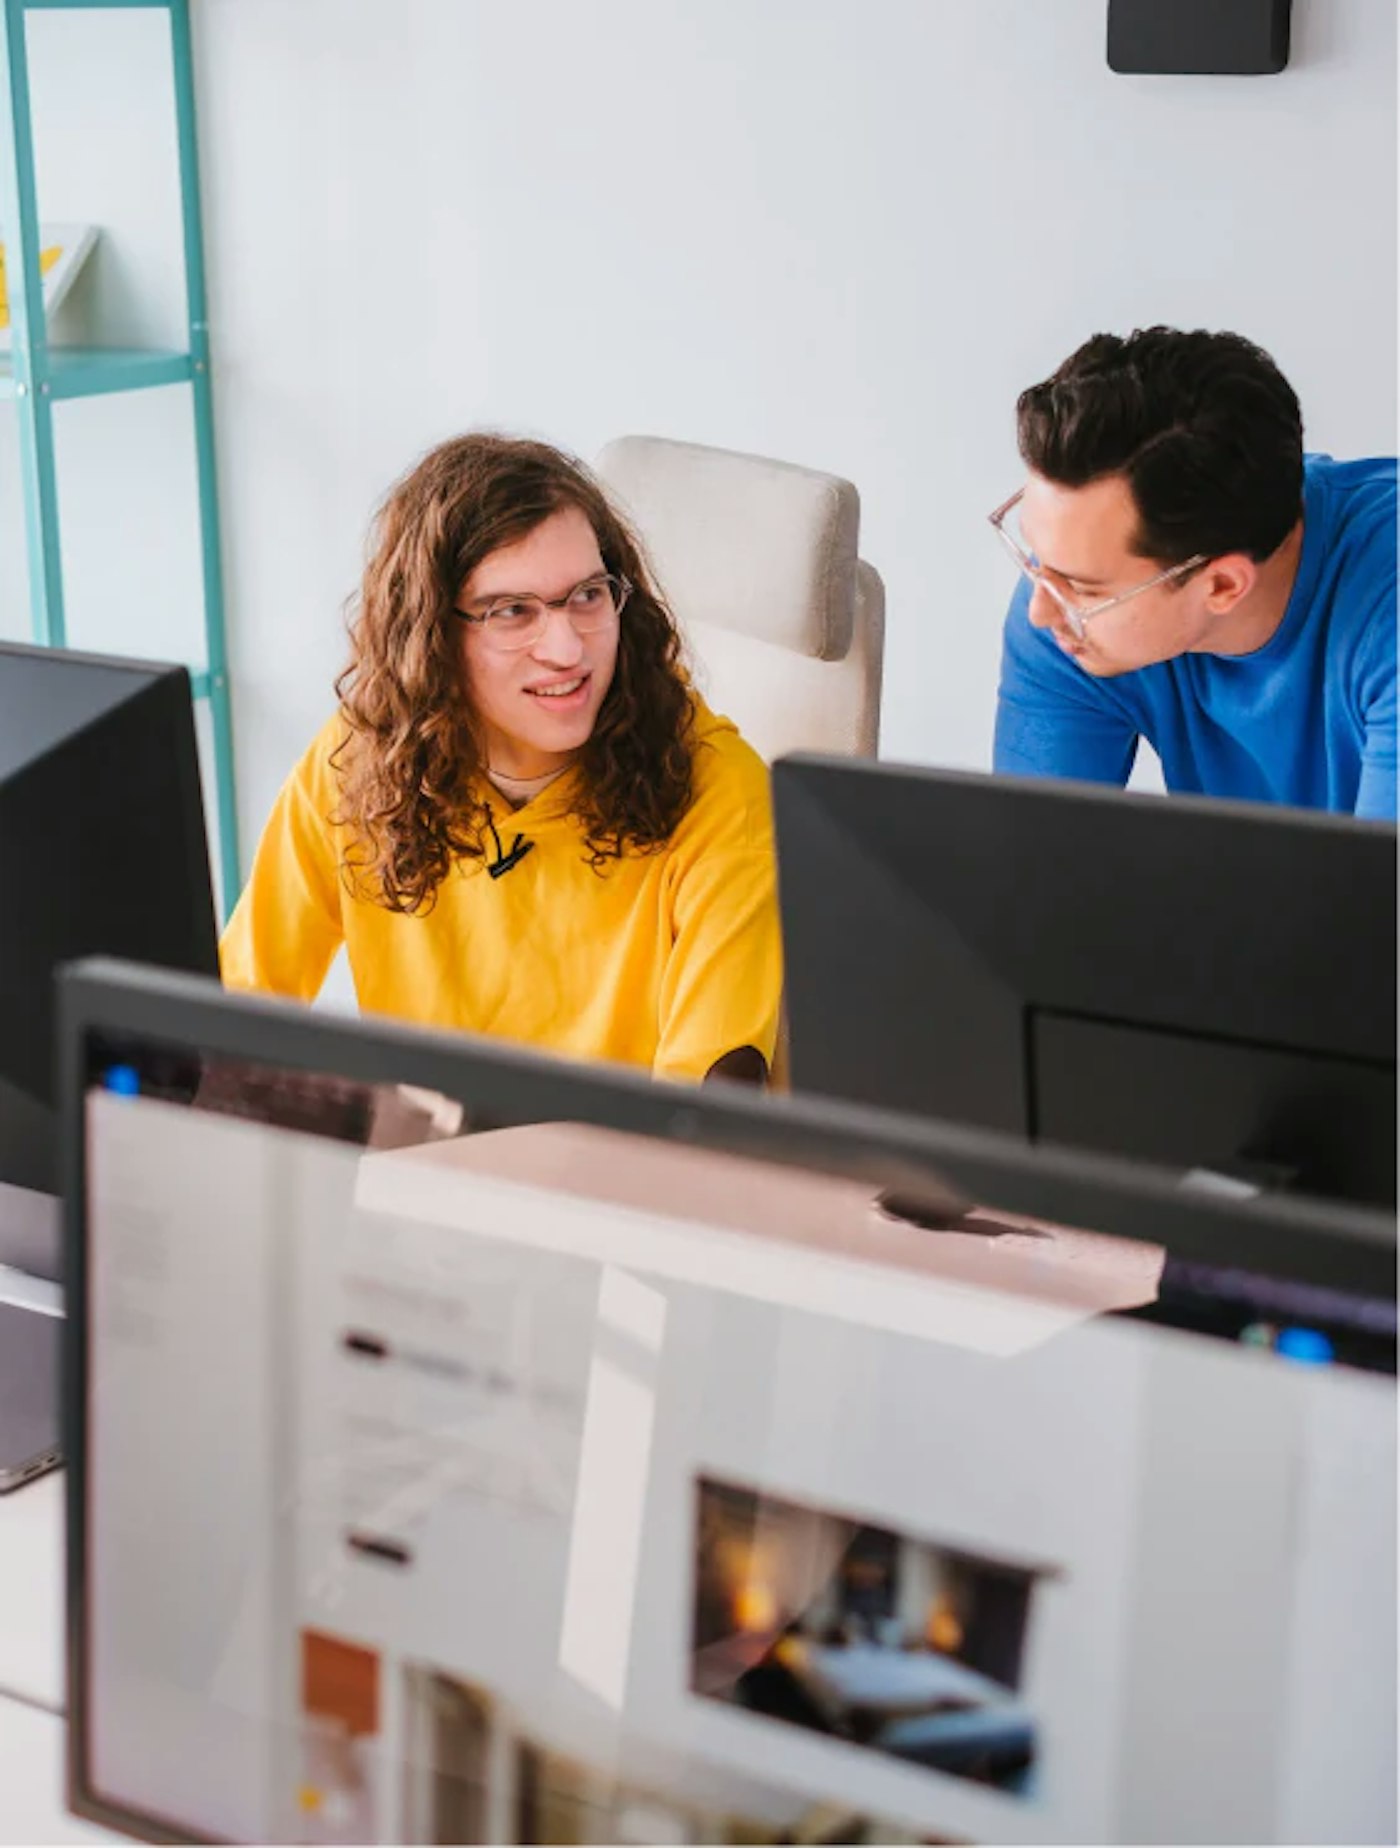 Two people having a conversation behind a desk, as seen behind a set of computer displays. One of them is wearing a bright yellow sweater and the other one is wearing a bright blue sweater.